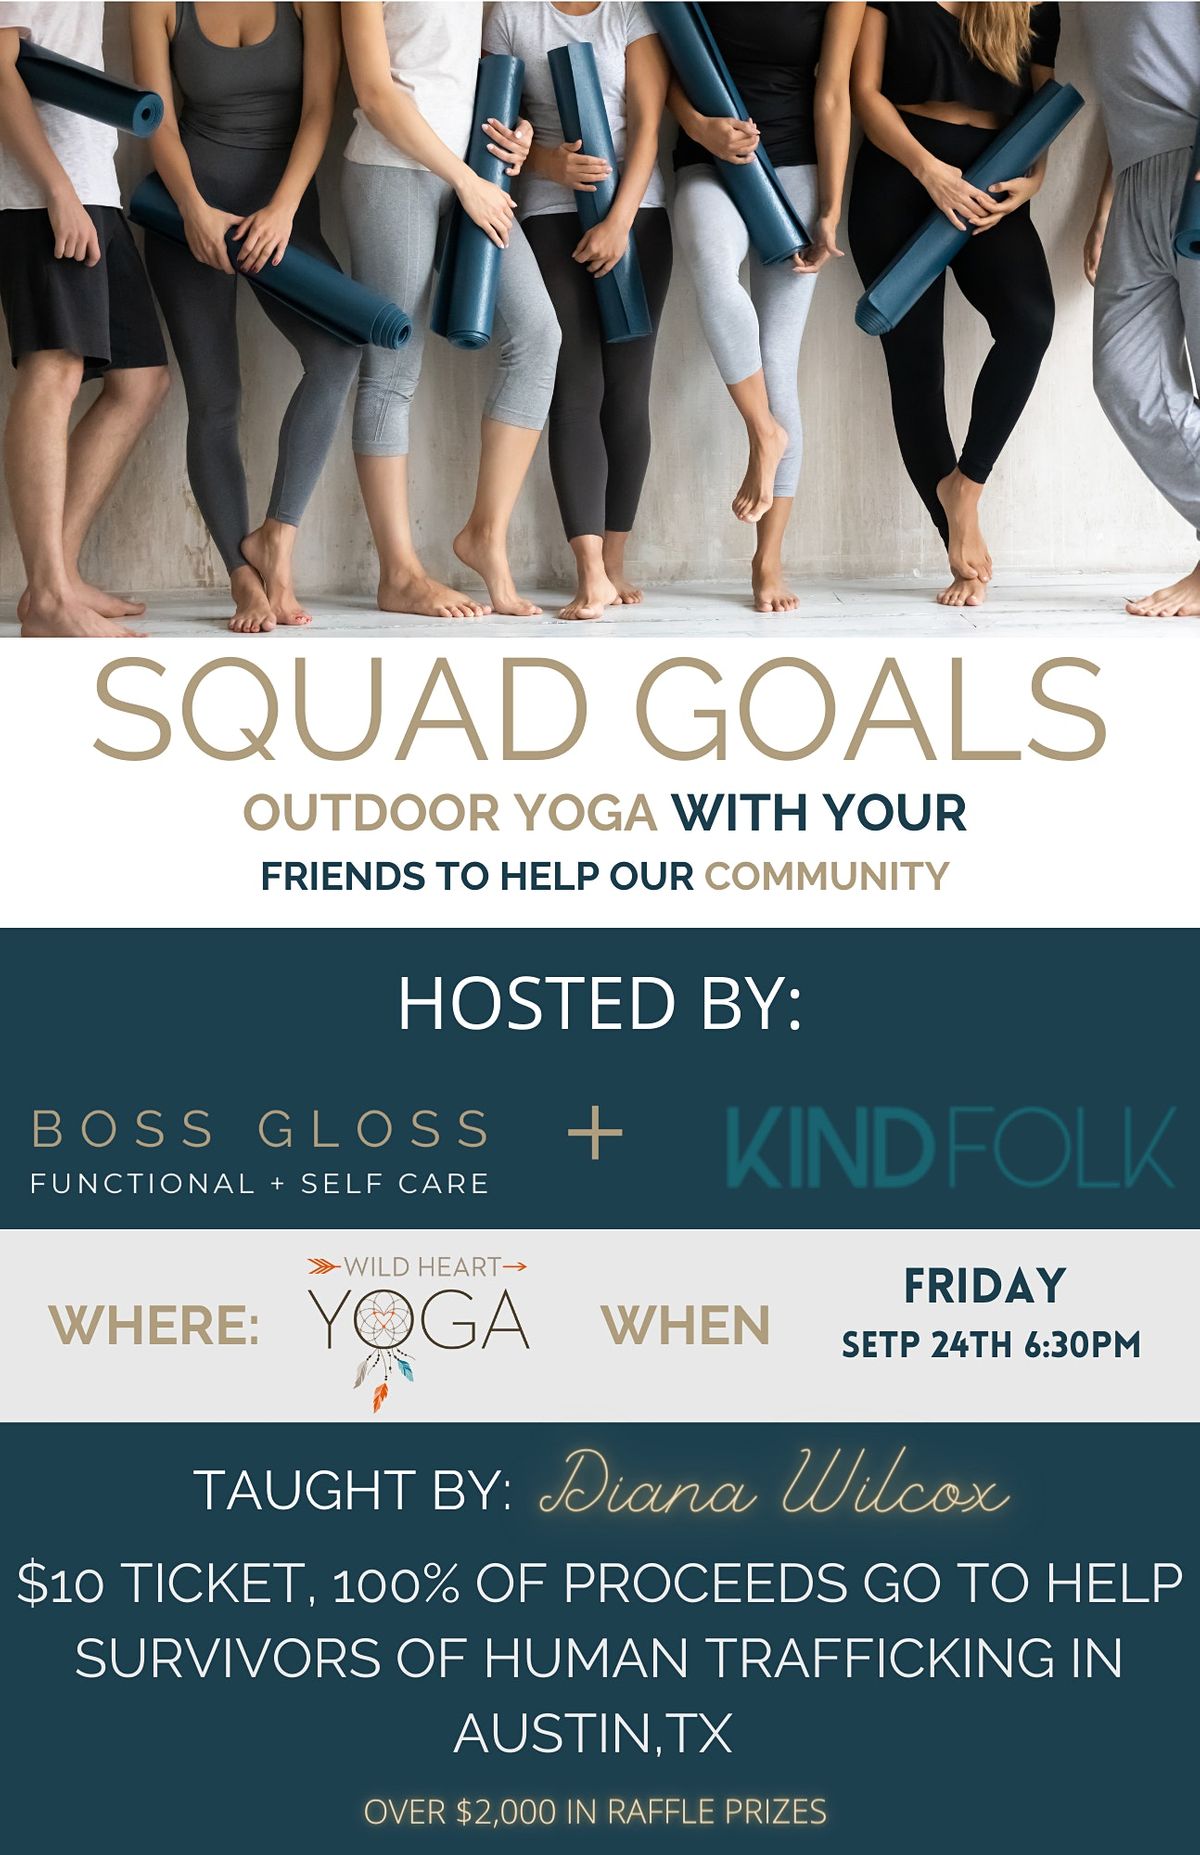 CHARITY YOGA EVENT  WITH BOSS GLOSS AND KINDFOLK